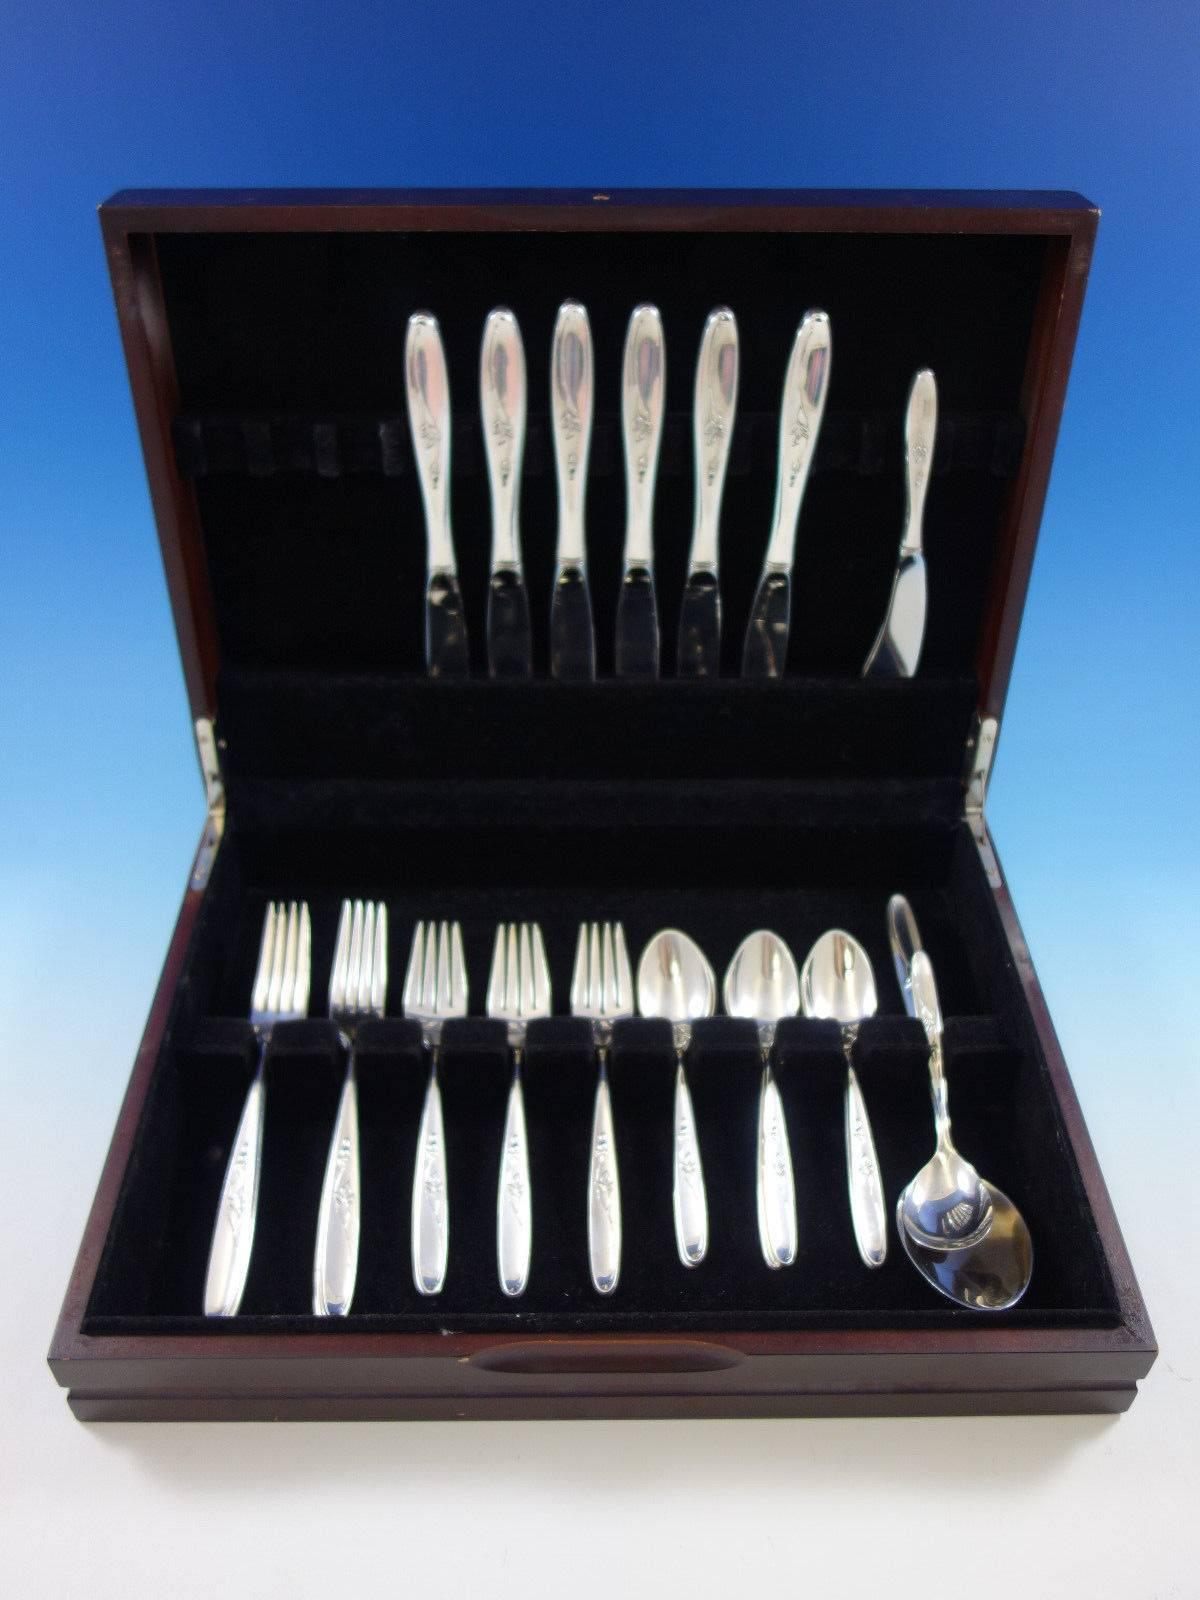 Rose Solitaire by Towle sterling silver flatware set, 27 pieces. Great starter set! This set includes: 

six knives, 9